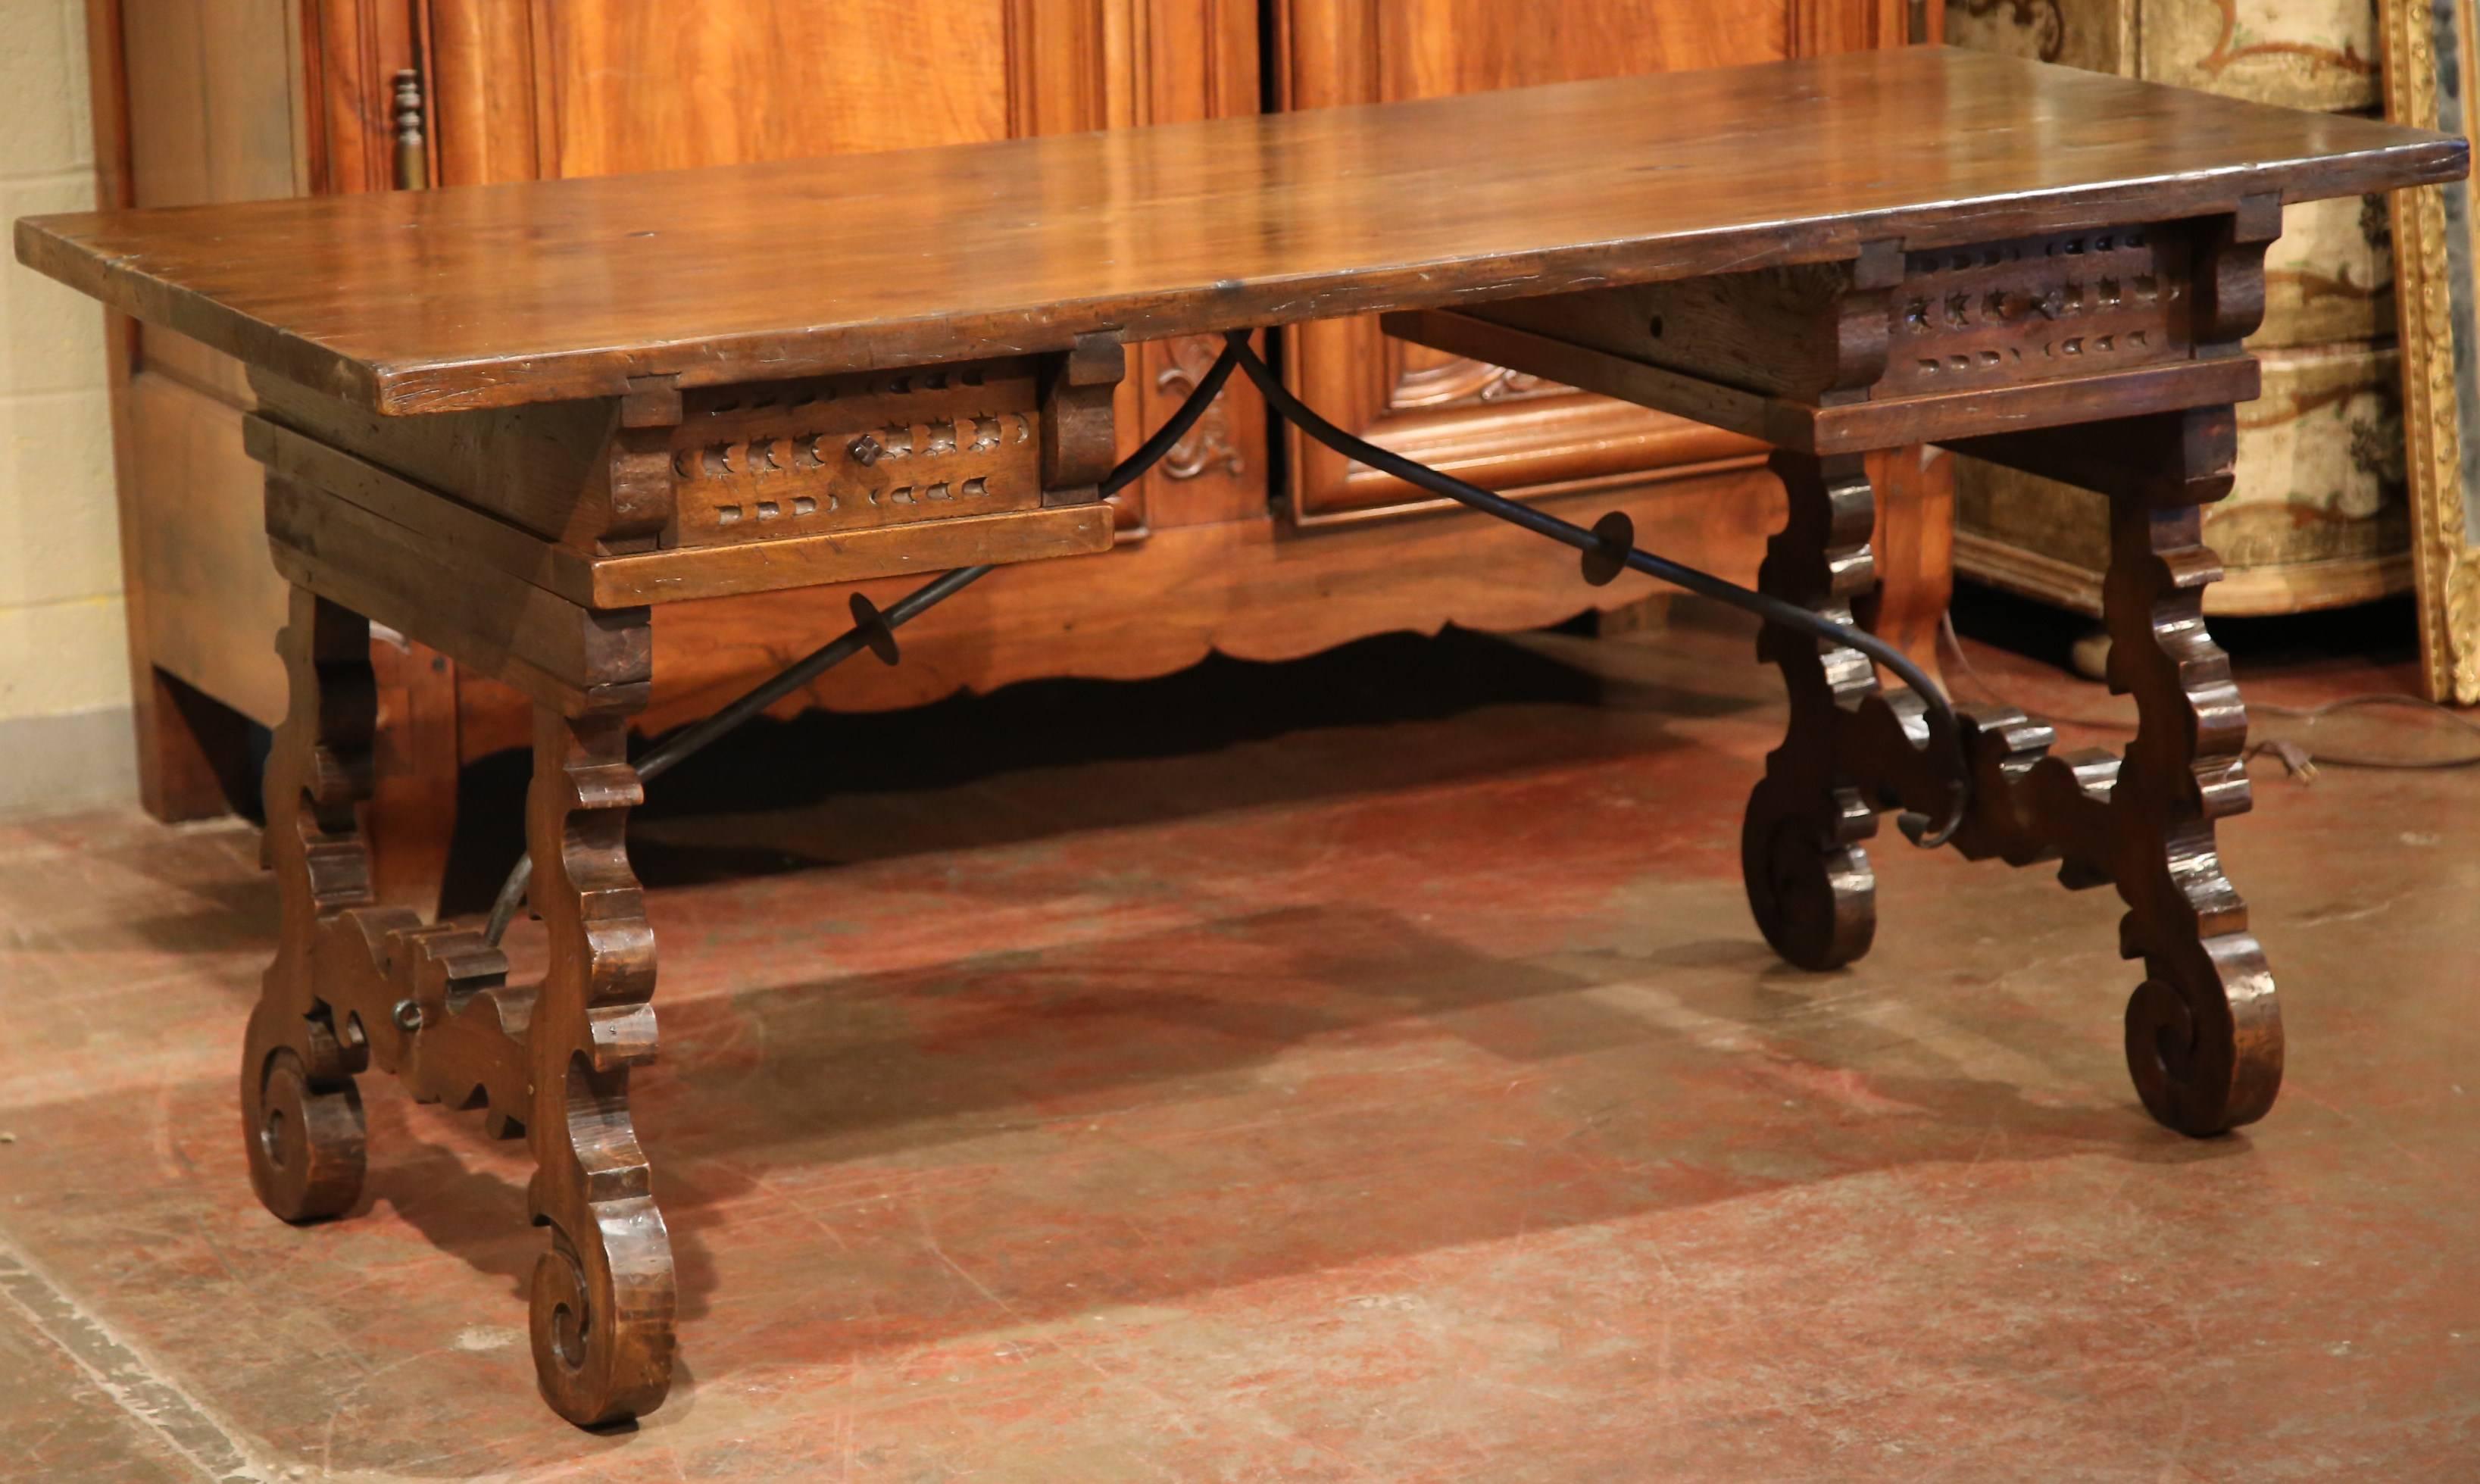 Forged Early 20th Century Spanish Carved Walnut Desk with Wrought Iron Stretcher